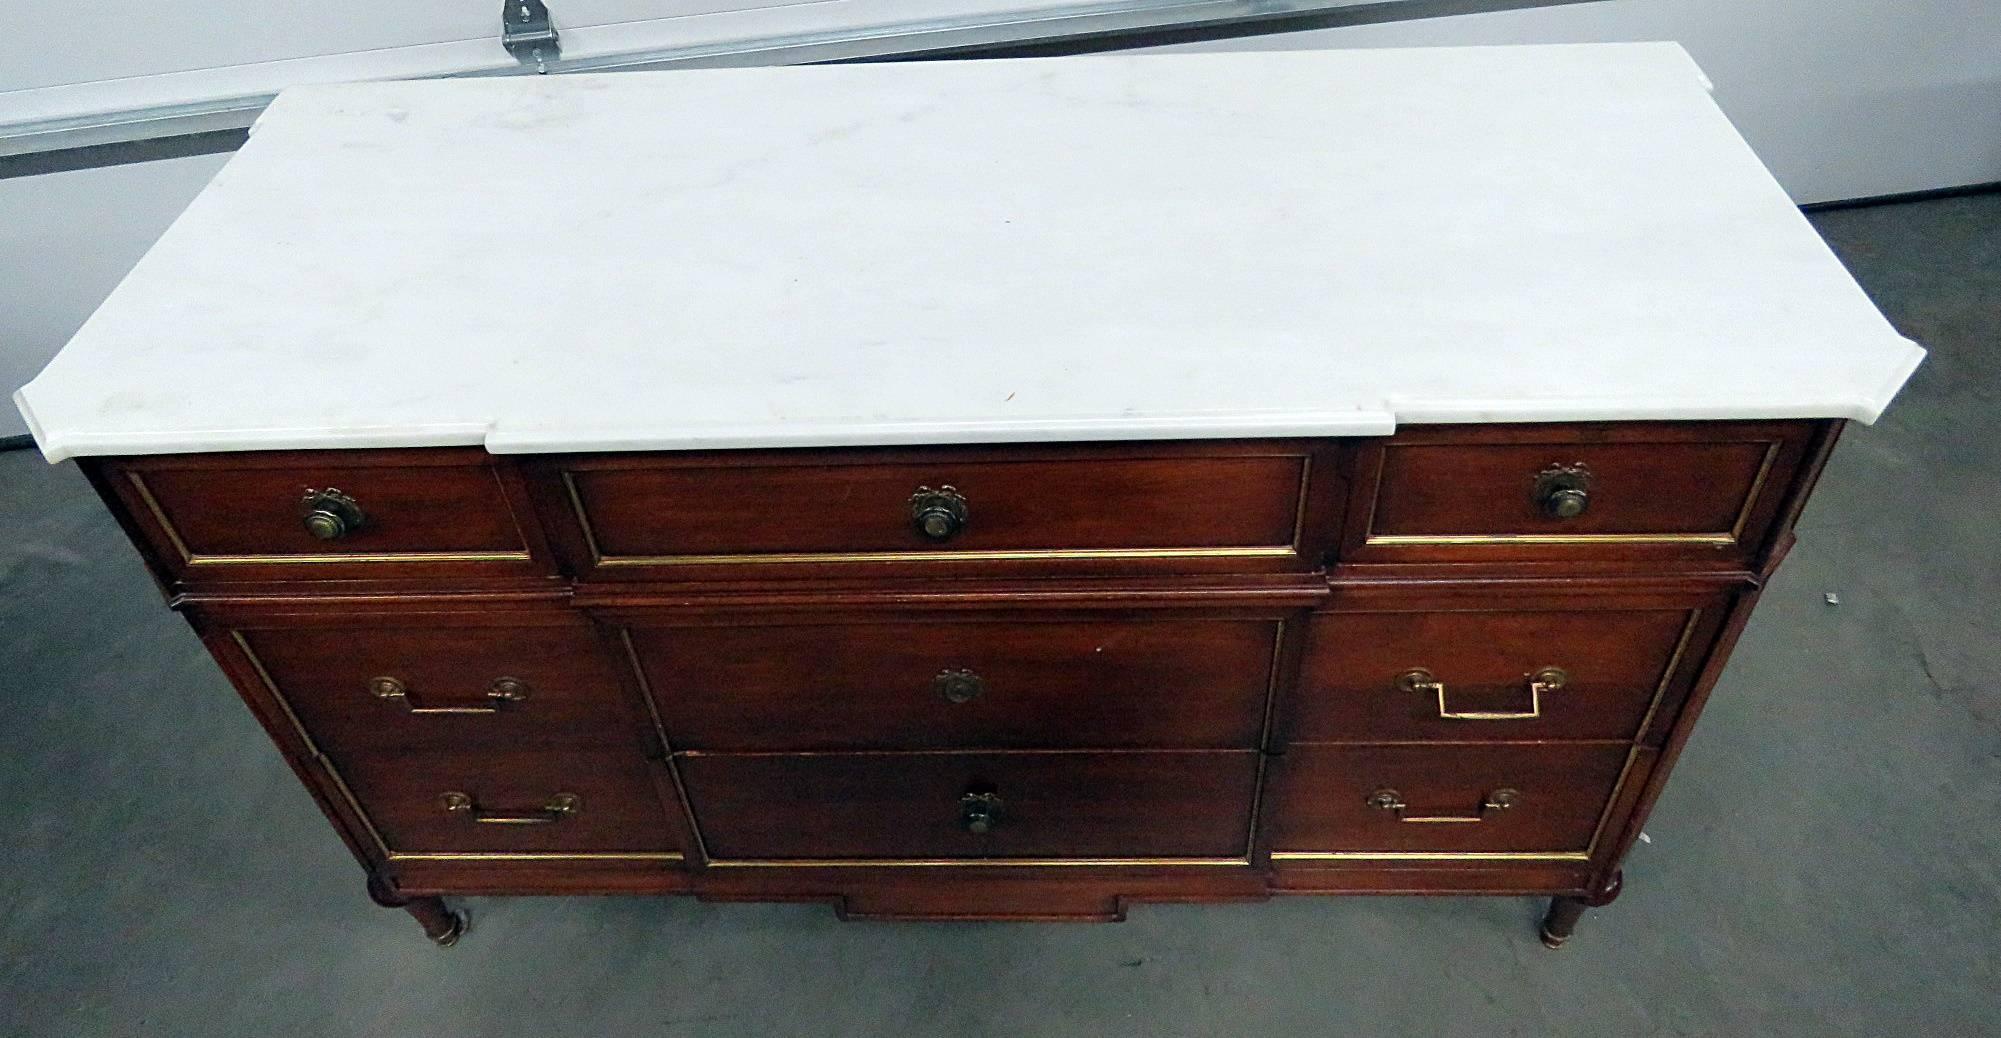 Maison Jansen marble top nine-drawer commode with brass accents.